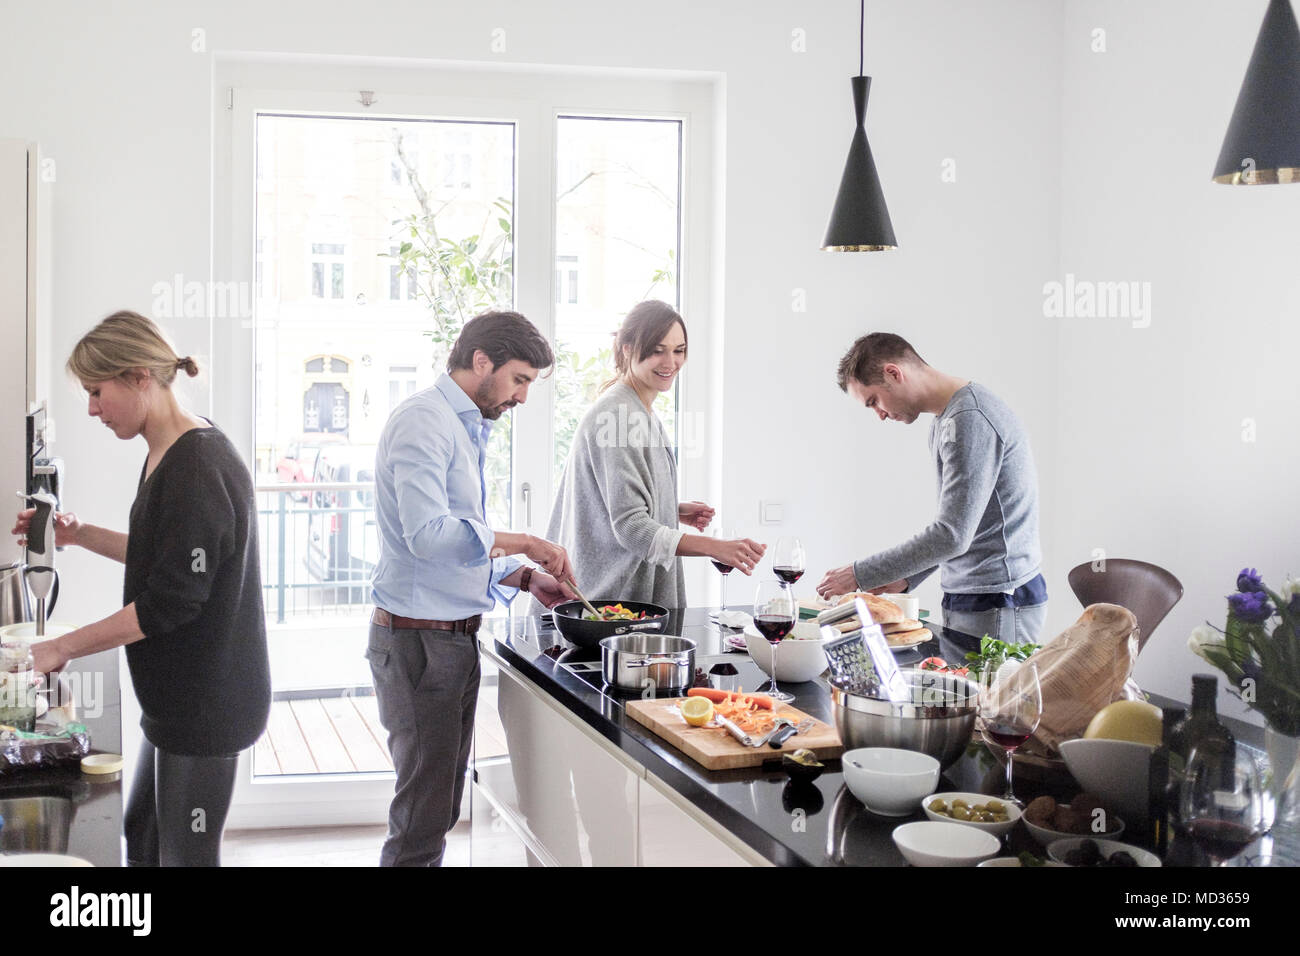 Group of friends casually cooking together while laughing and enjoying themselves. Stock Photo